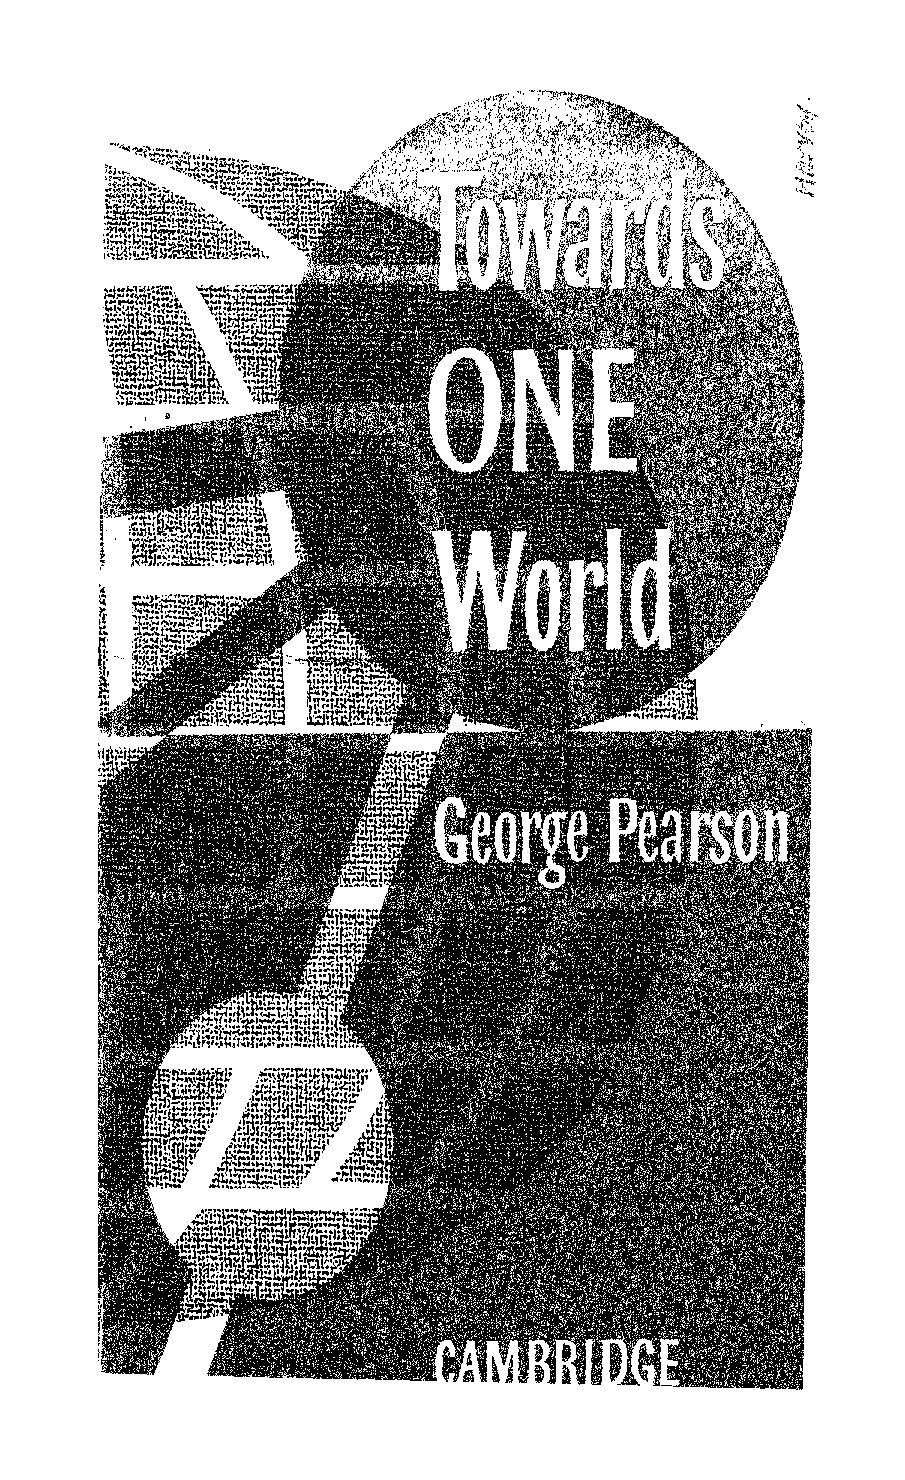 Pearson, George; Towards One World